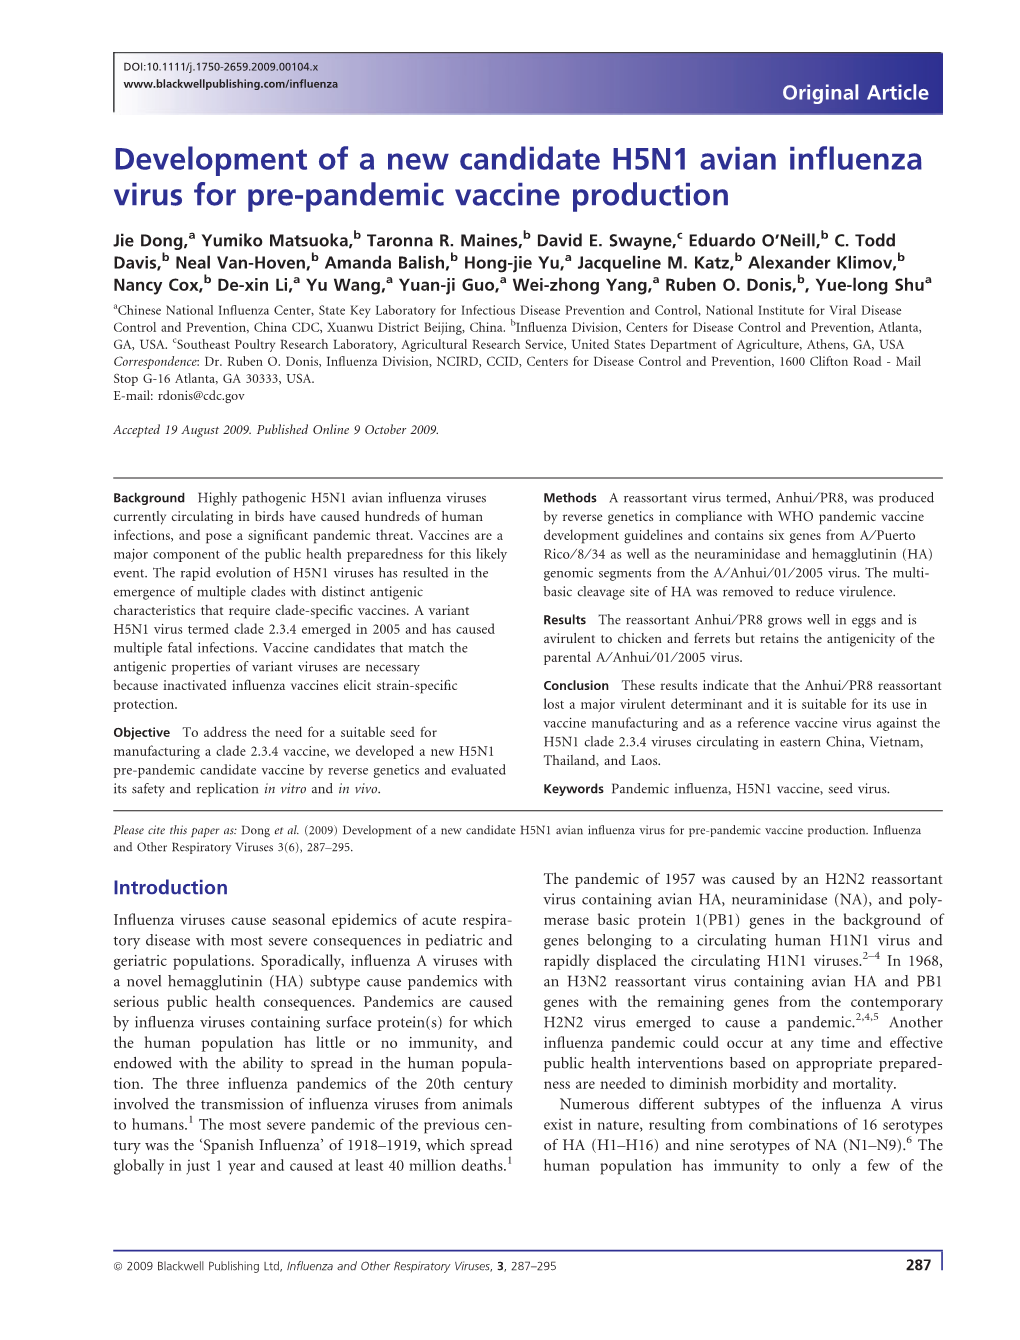 Development of a New Candidate H5N1 Avian Influenza Virus for Pre